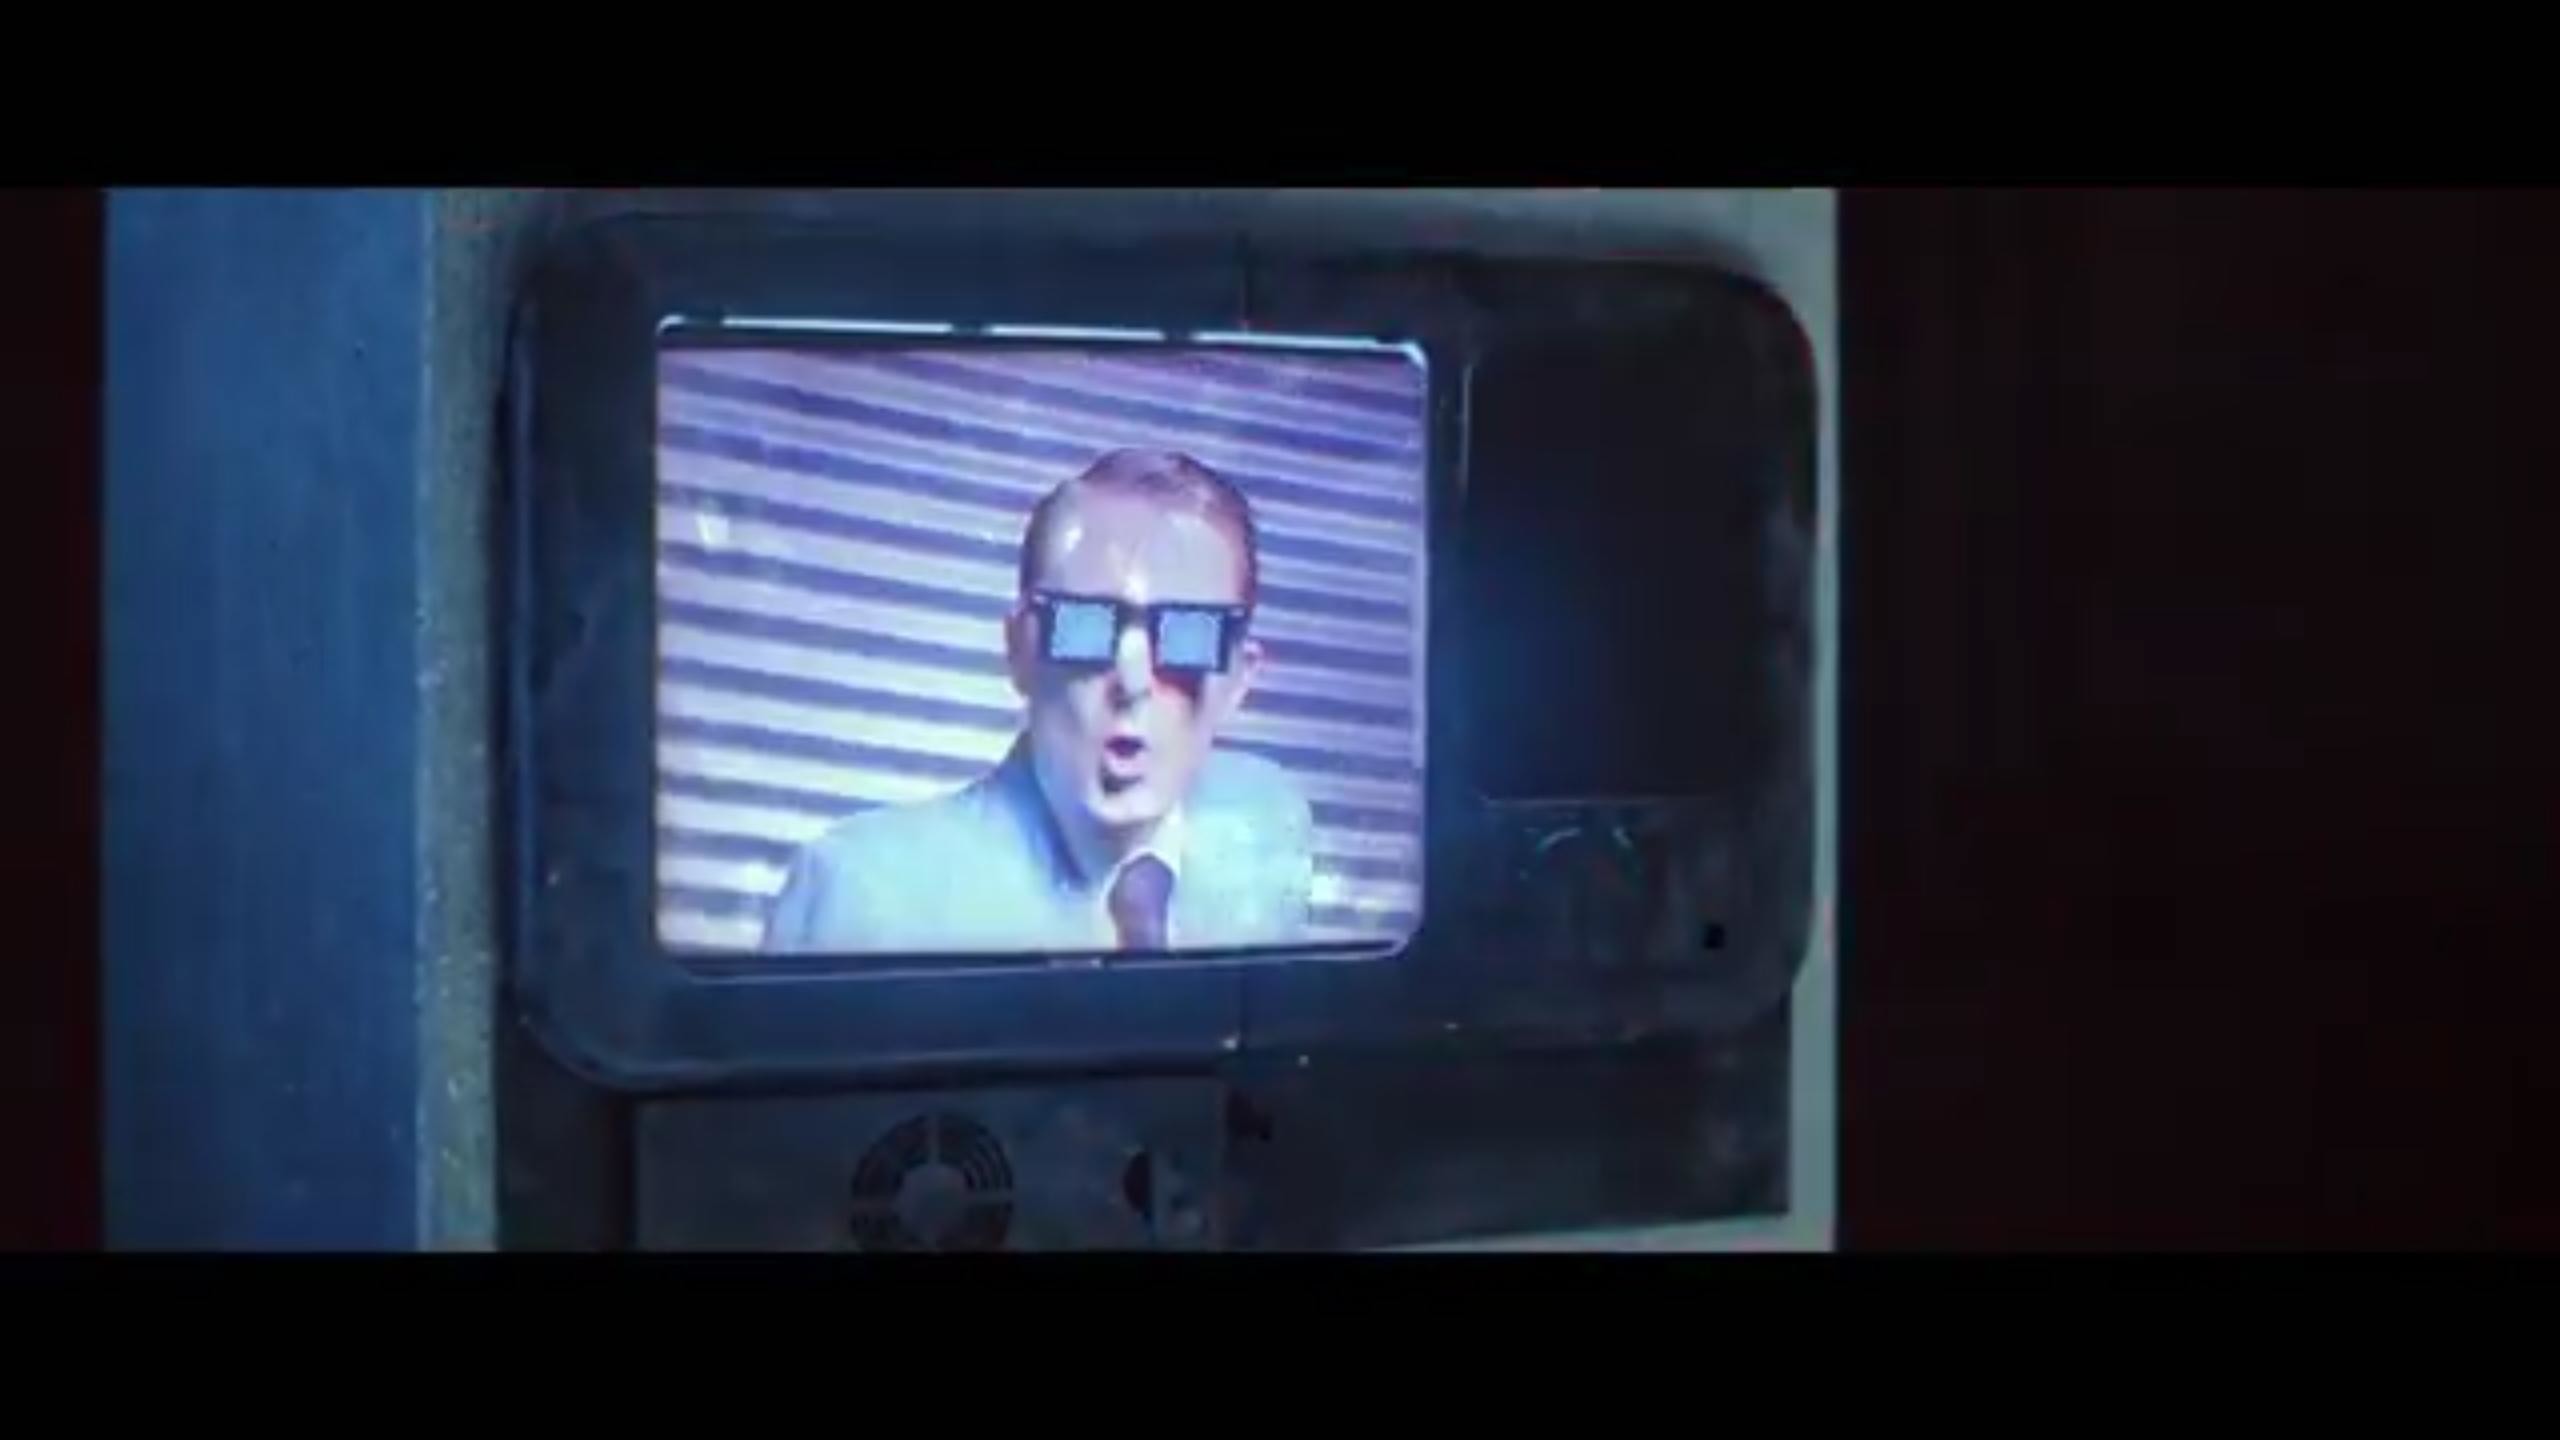 2560x1440 Matt was definitely going for the "Max Headroom" look in the dig down video